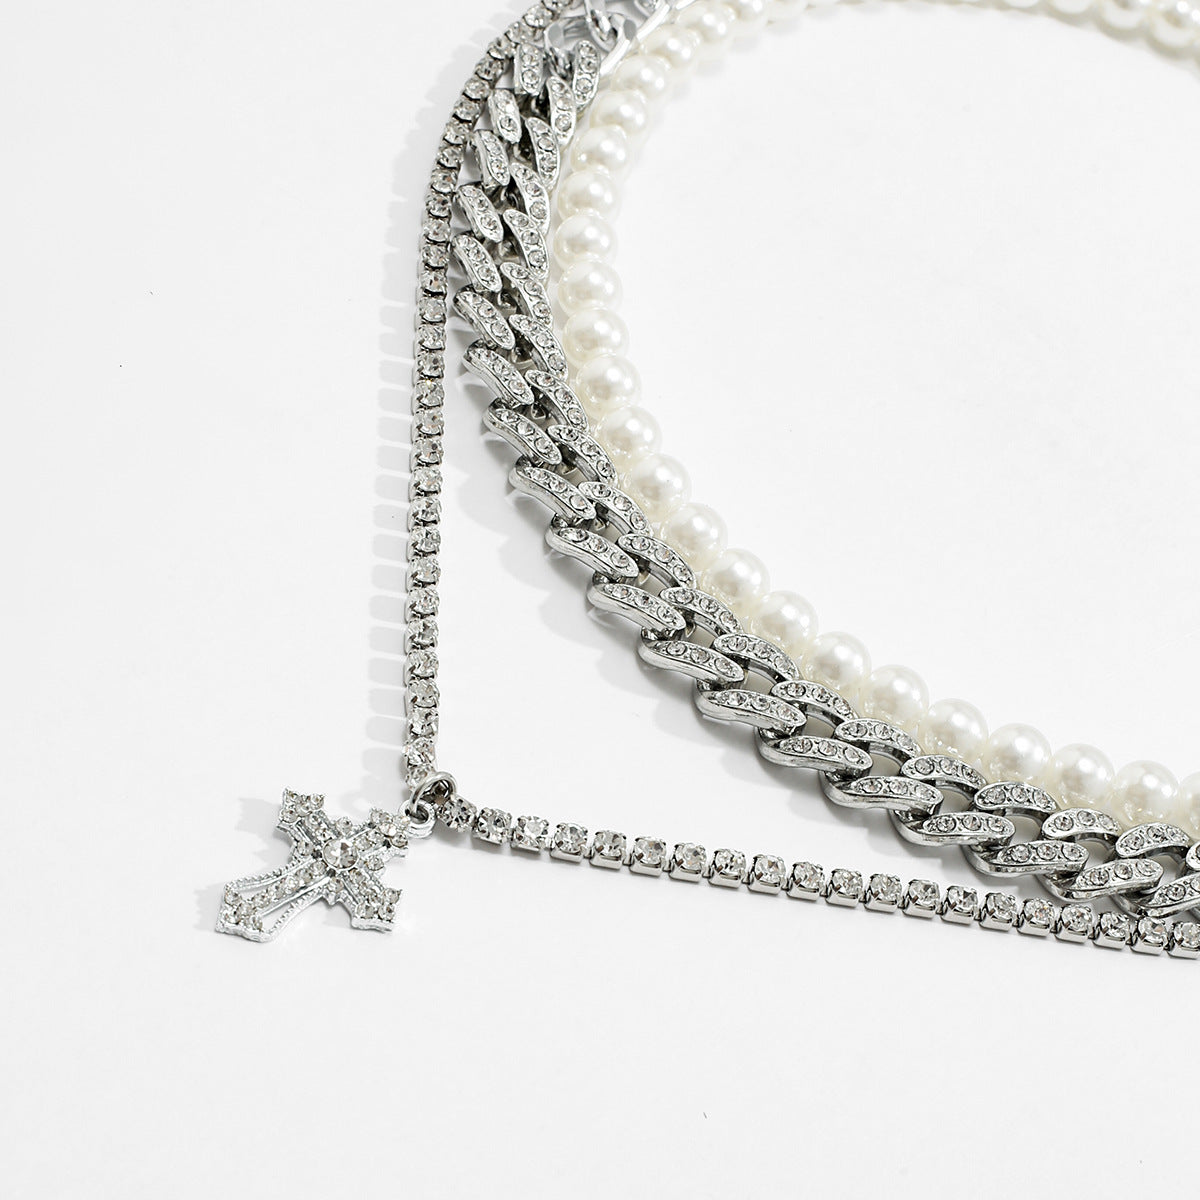 Trendy and fashionable pearls with Cuban chain and cross-studded diamond multi-layer design versatile necklace